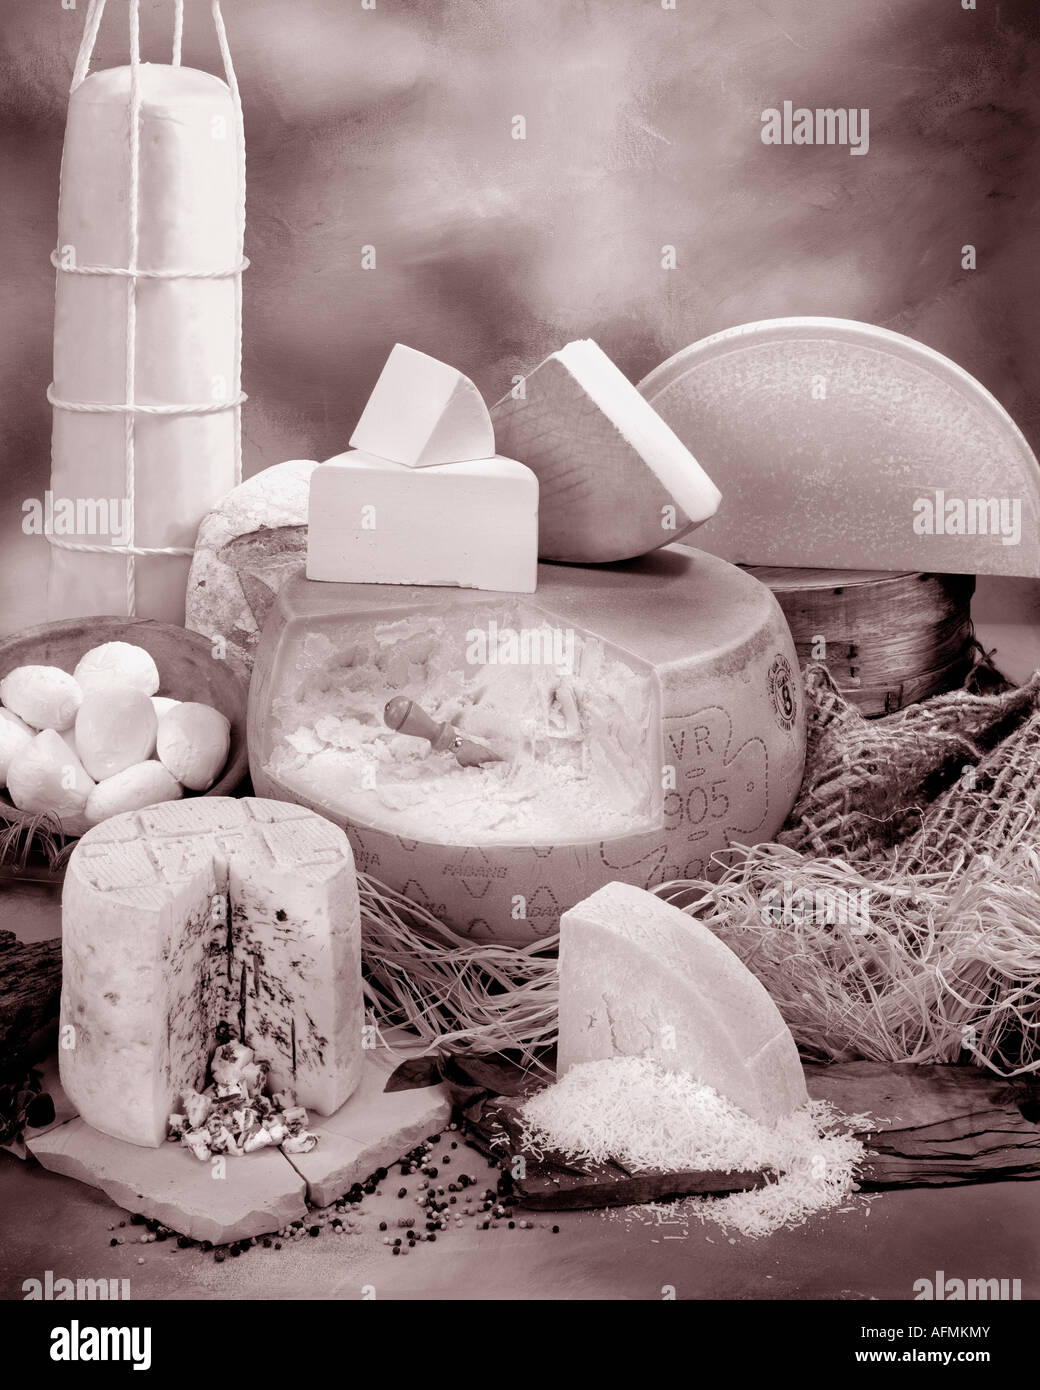 Italian Cheeses in group sepia photograph on warm toned mottled background. vertical  format, studio tabletop. Classic Image. Stock Photo